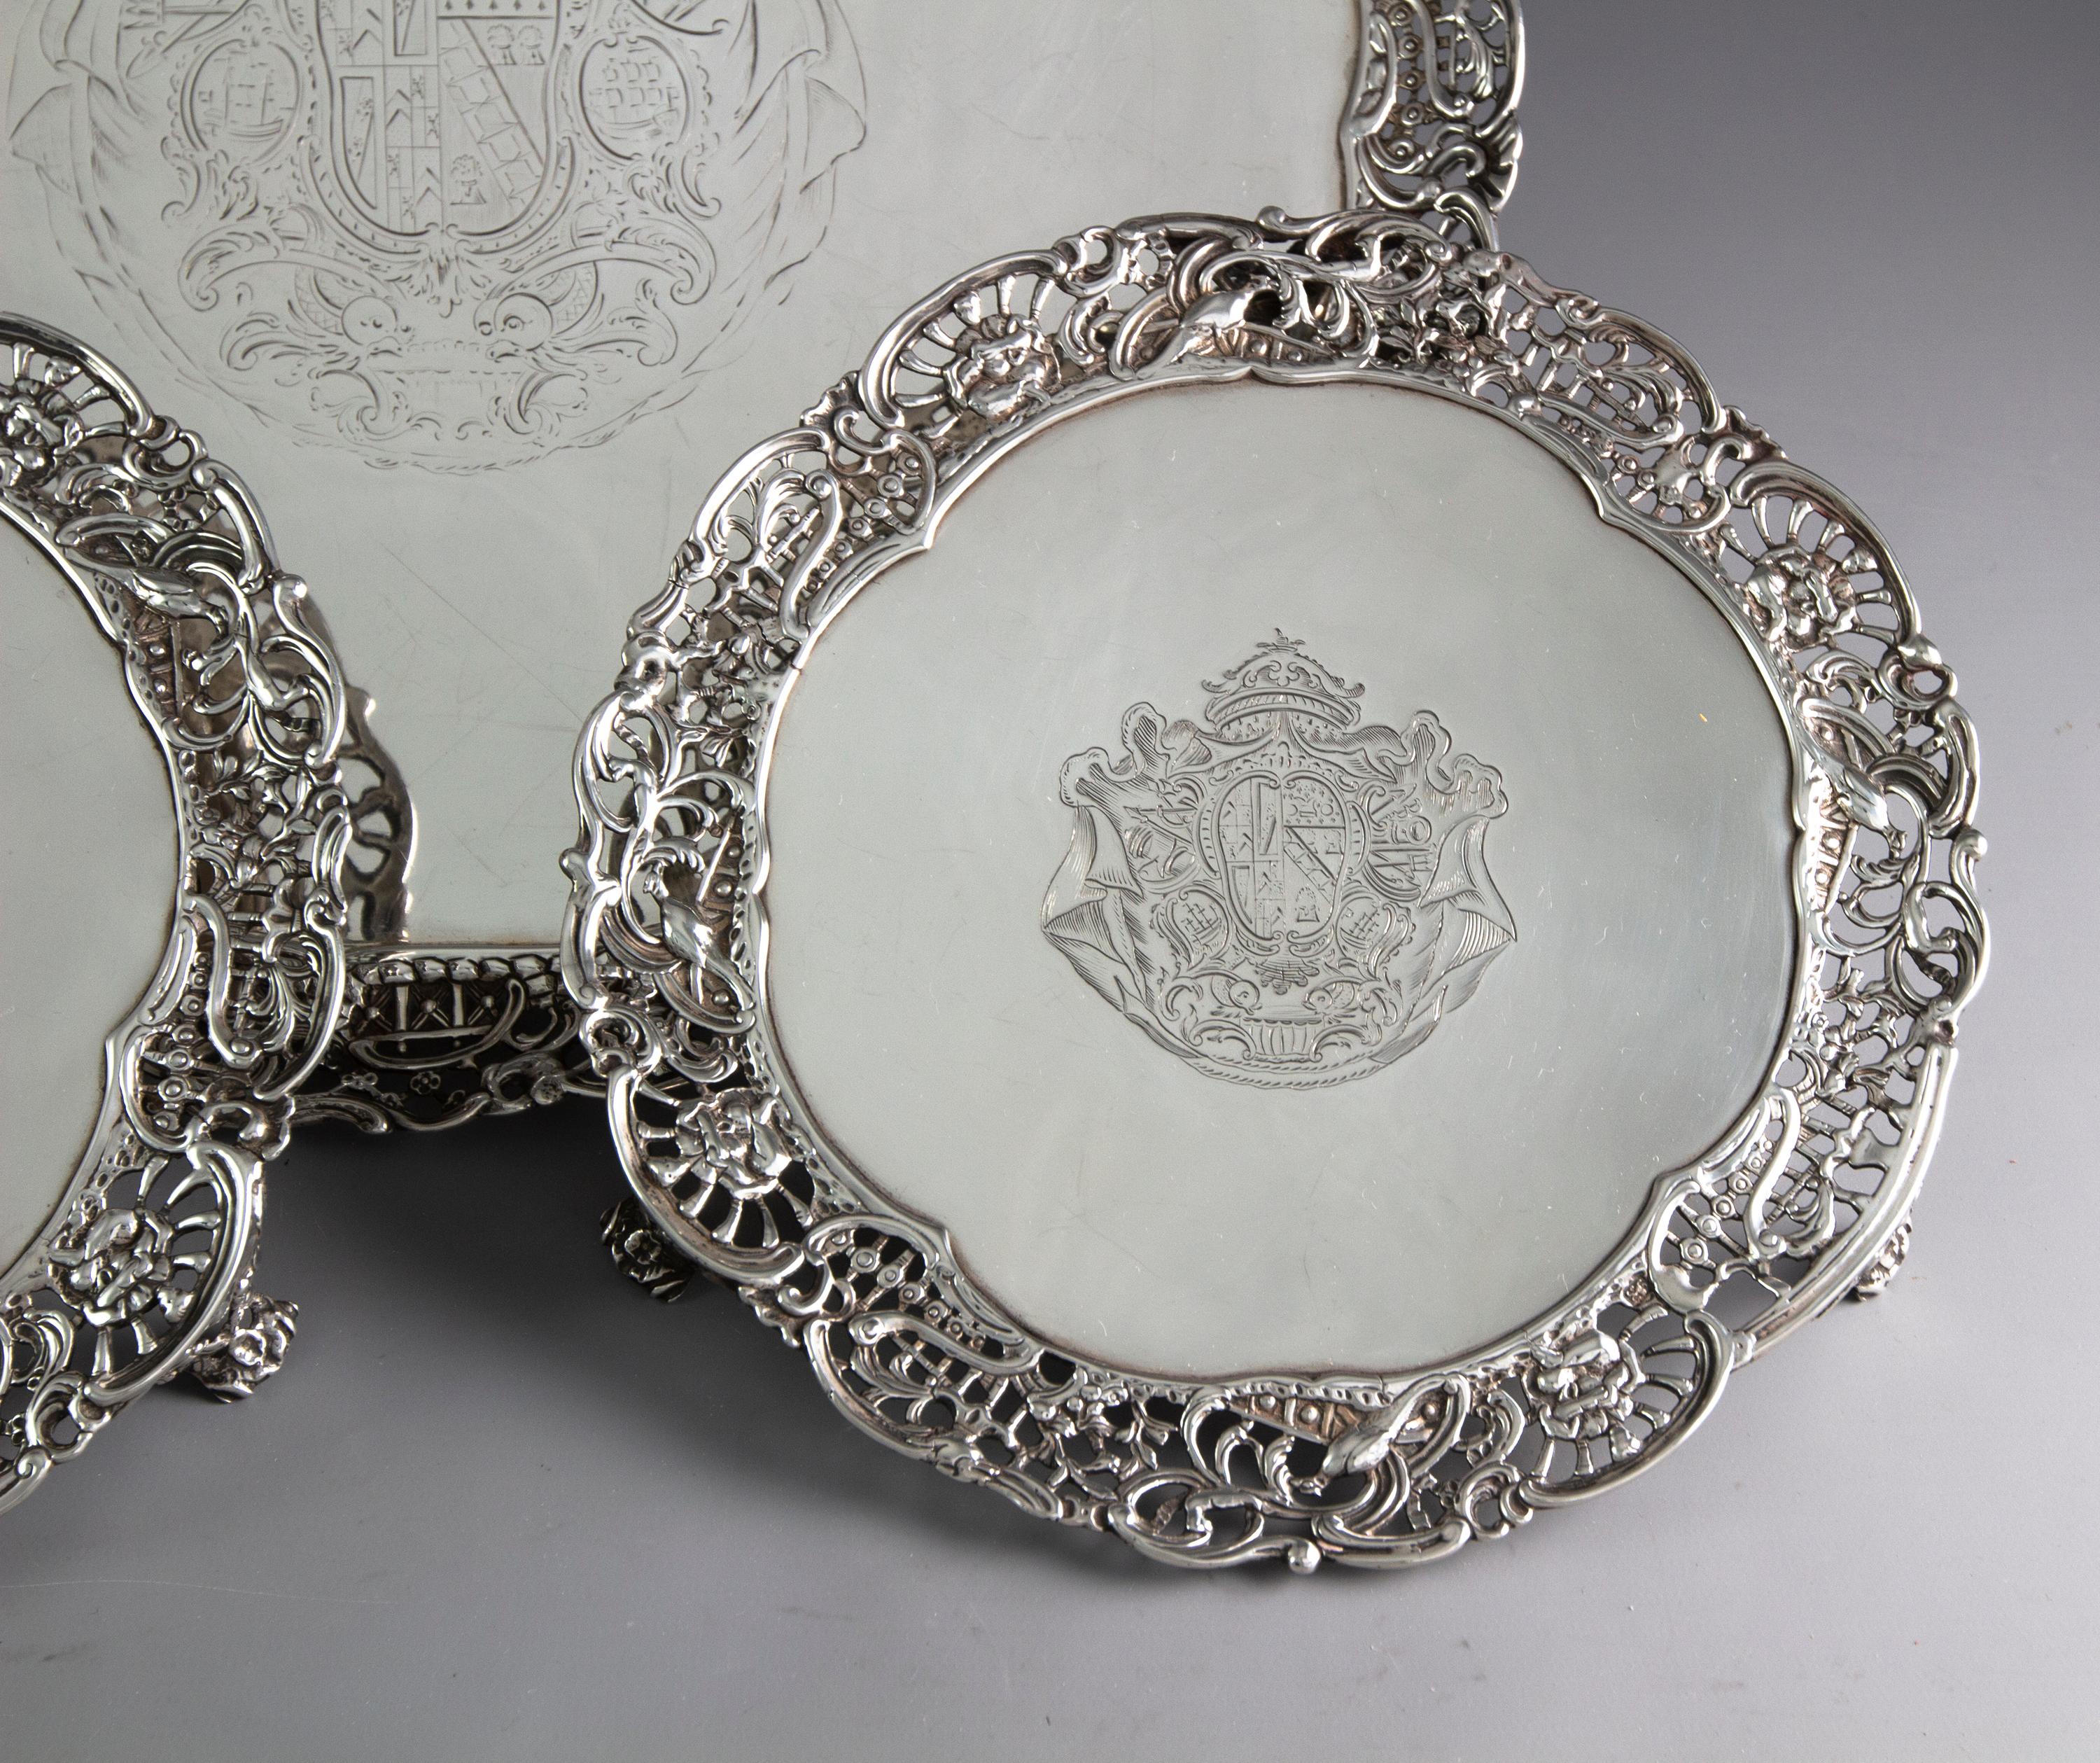 English Set of 3 George III Silver Salvers or Trays, London 1762 by Richard Rugg For Sale